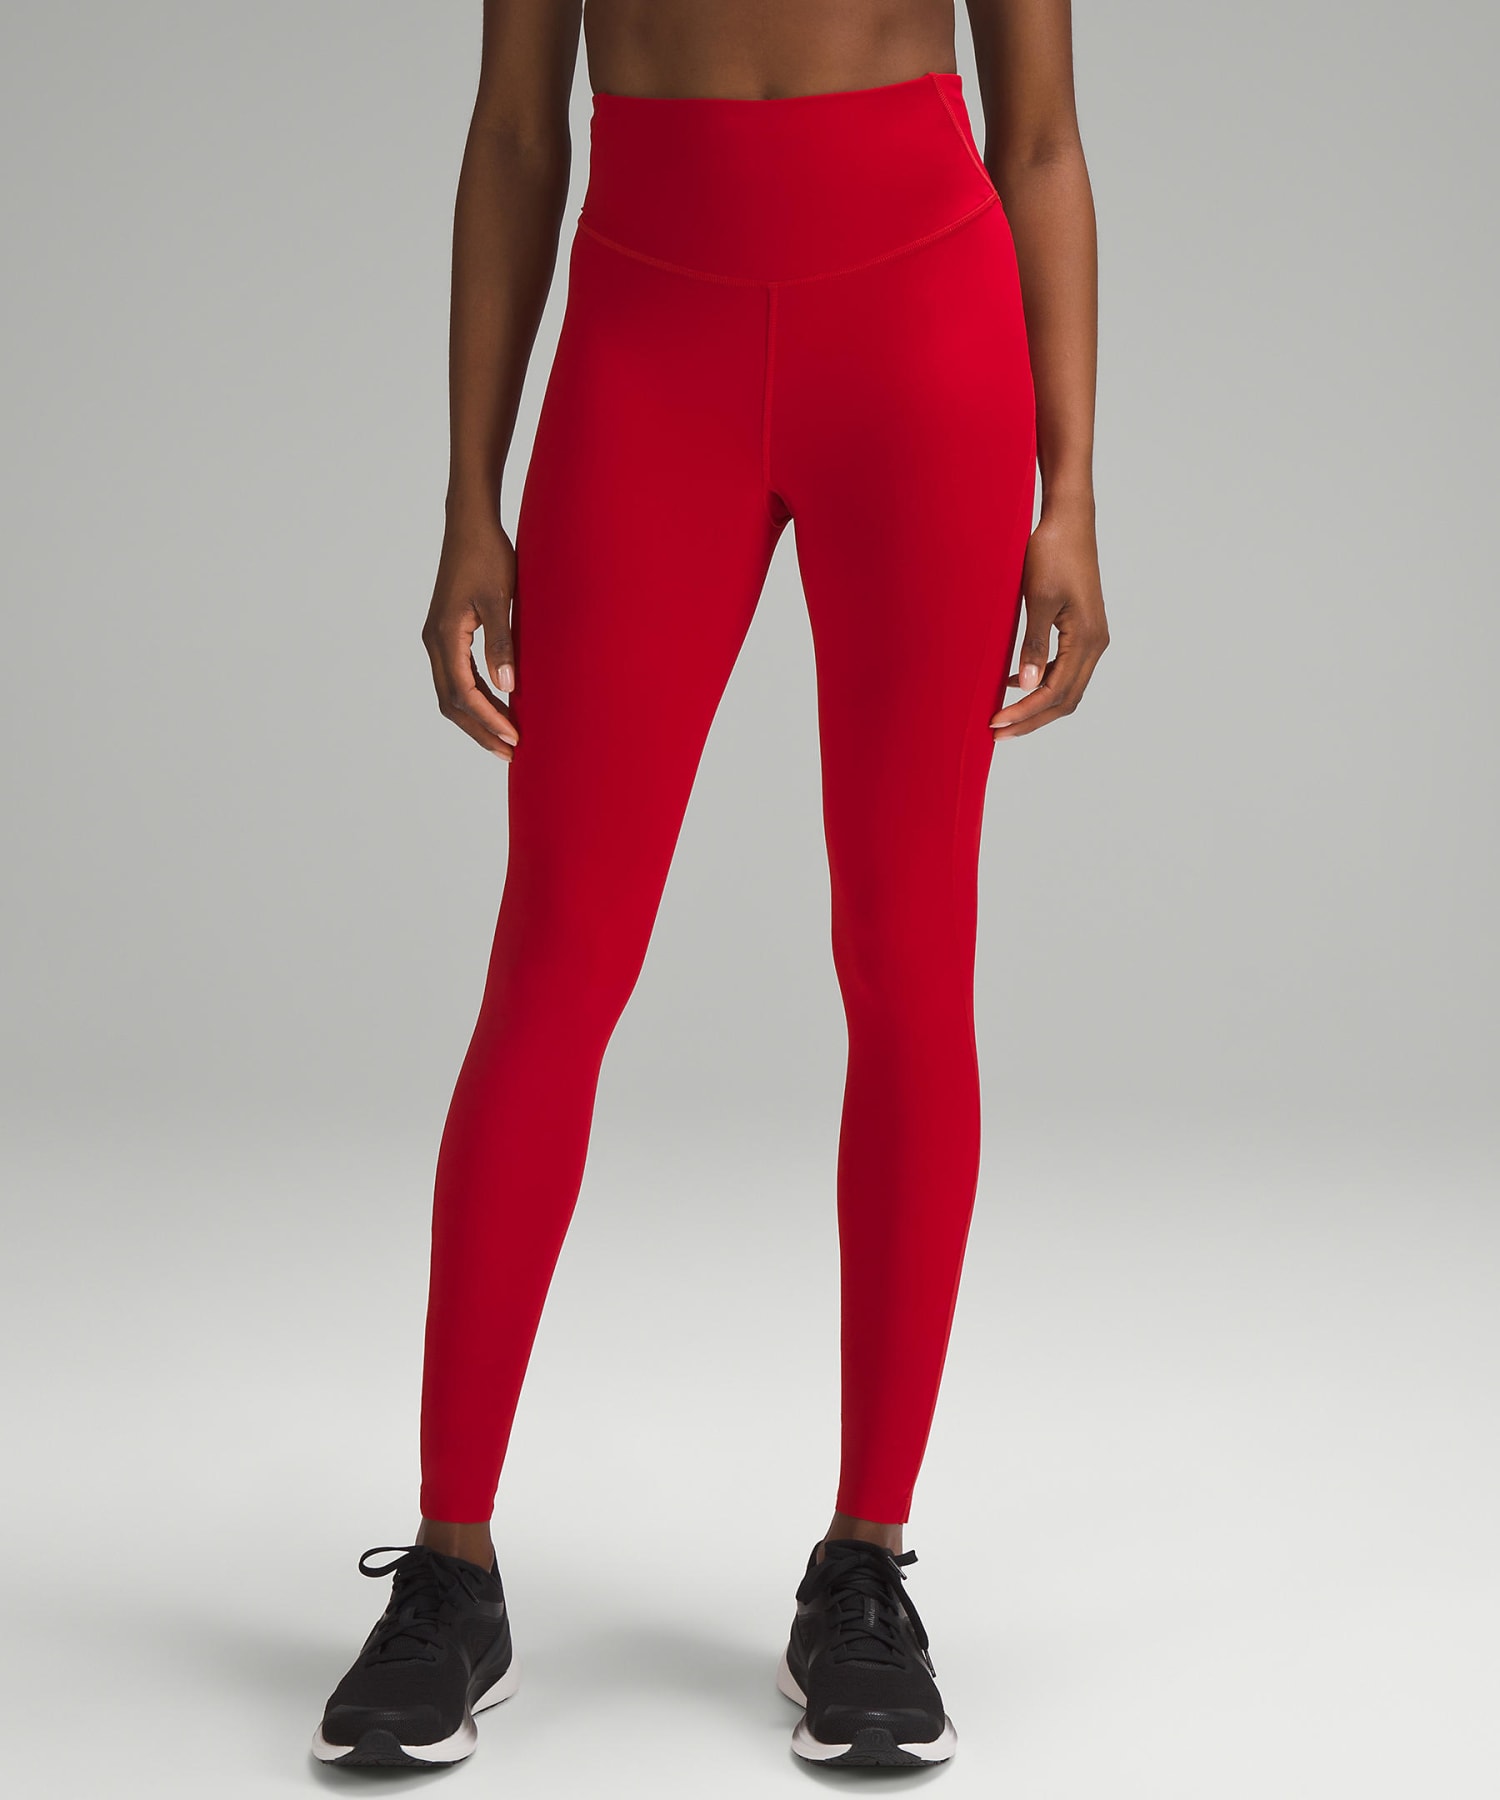 What are the best workout leggings? – Sequoit Media